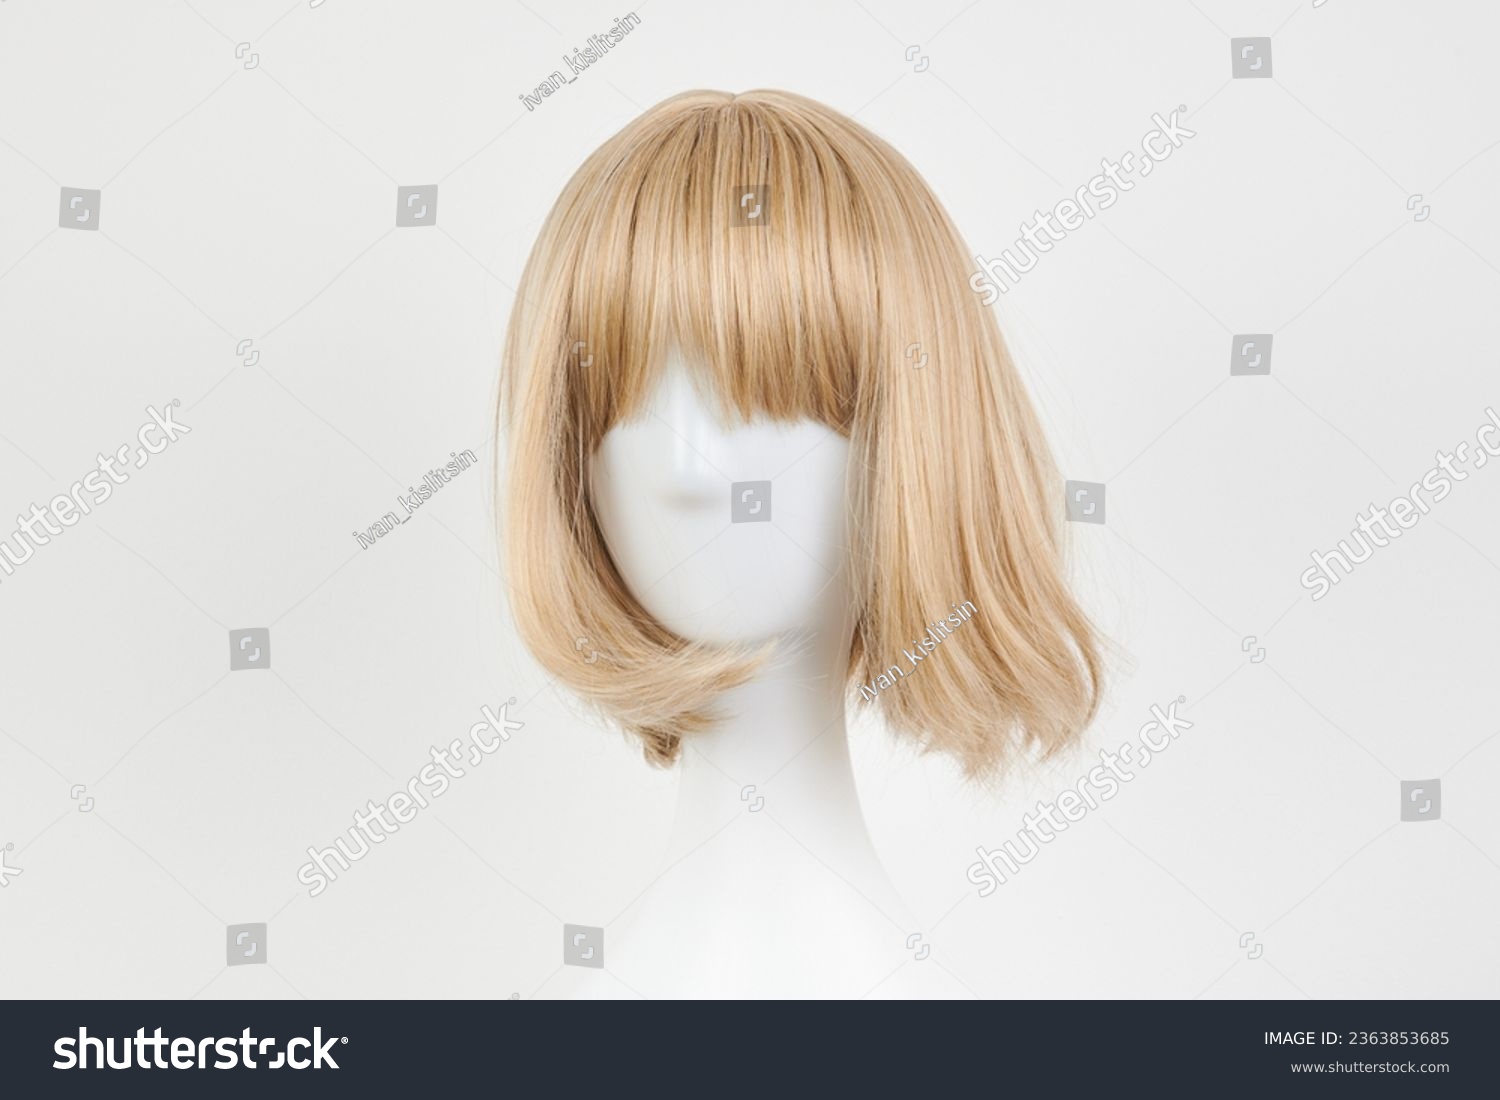 Natural looking blonde fair wig on white mannequin head. Short hair cut on the plastic wig holder isolated on white background, front view
 #2363853685